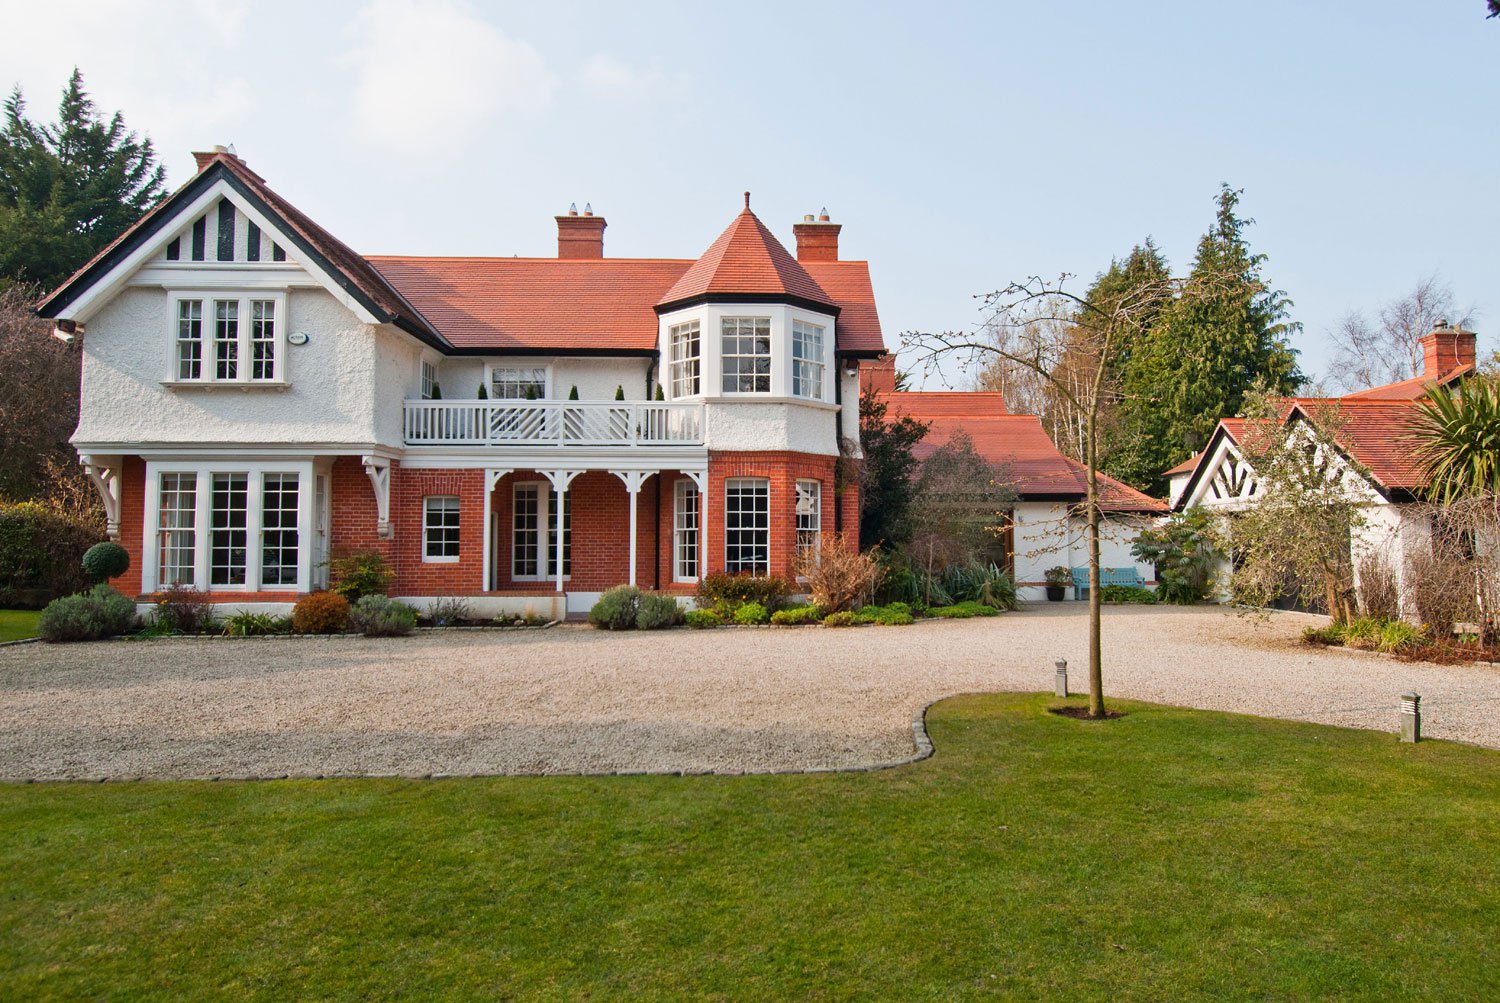 In Dublin, Ireland, Kenure is one of the finest homes in the affluent suburb of Foxrock. The historic property stands on an acre of secluded and imaginatively laid out gardens.